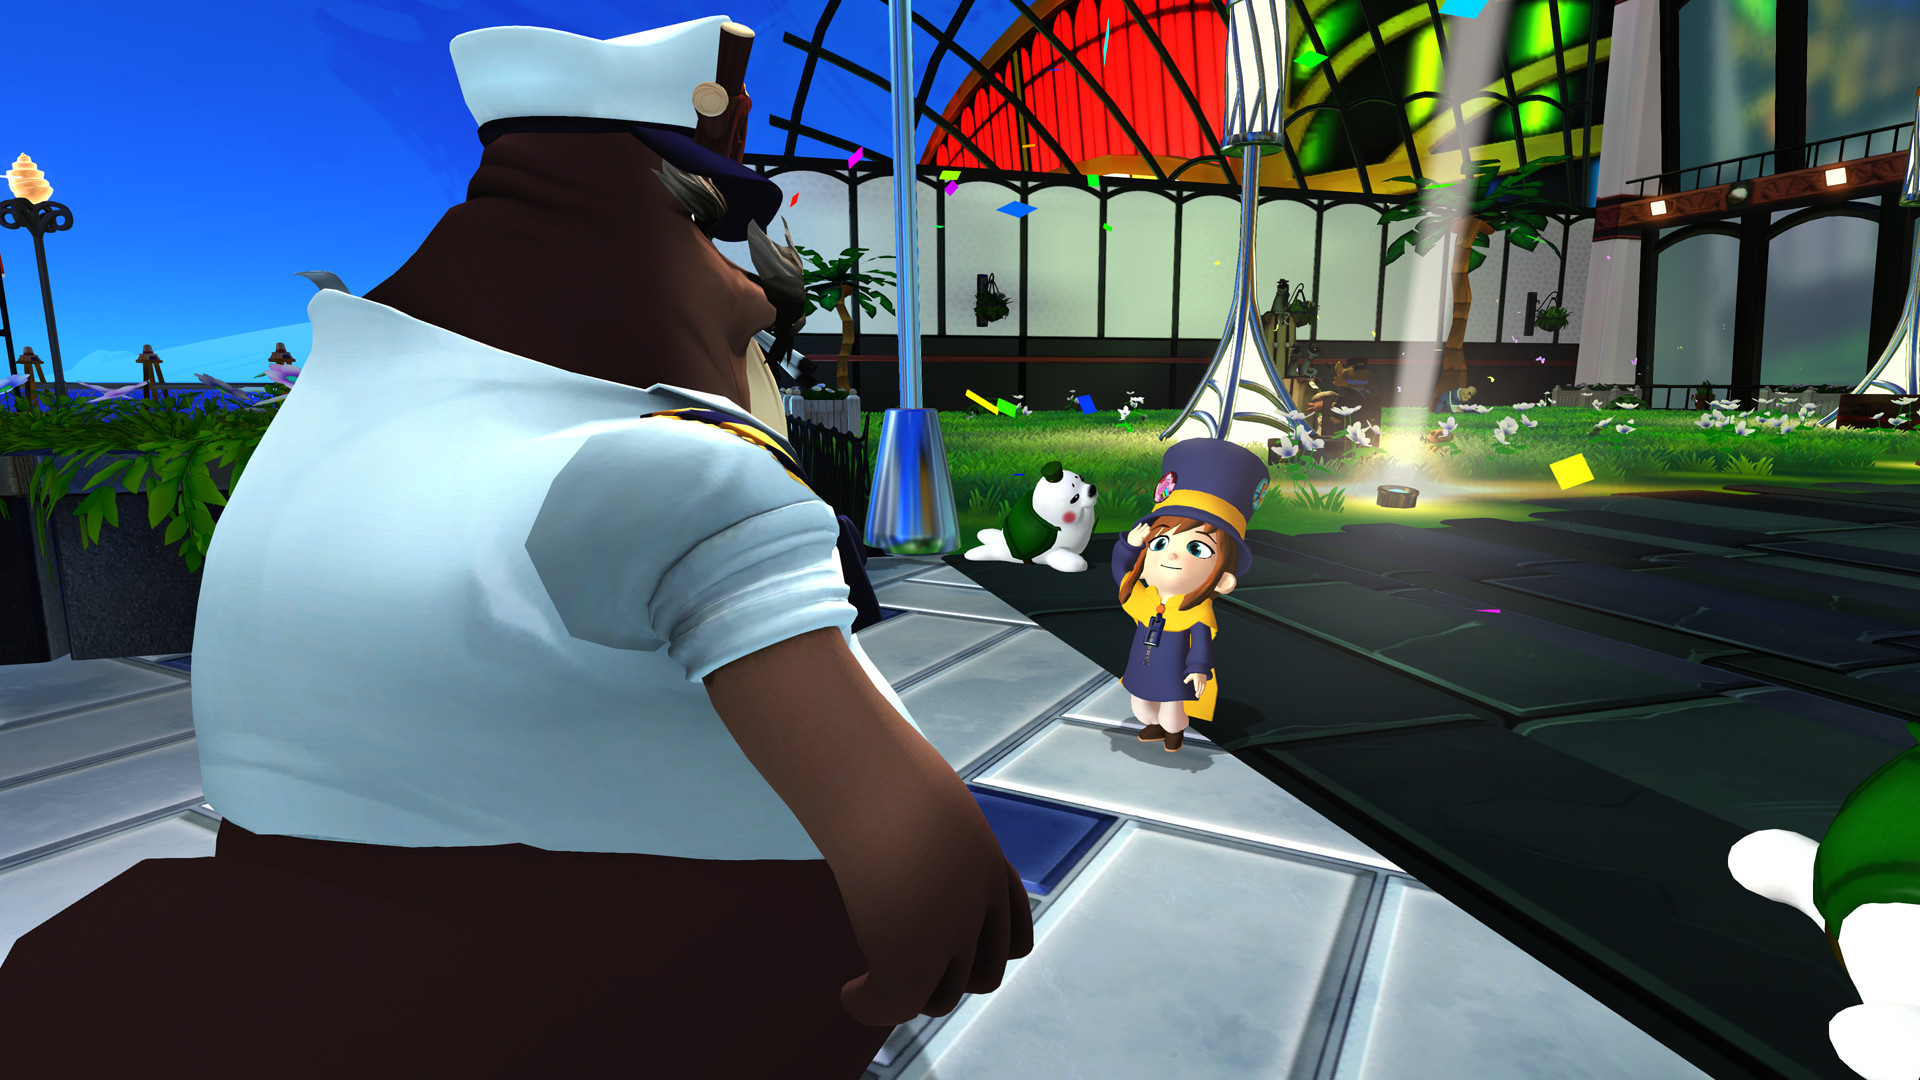 Claim a FREE Steam copy of A Hat in Time - Seal the Deal